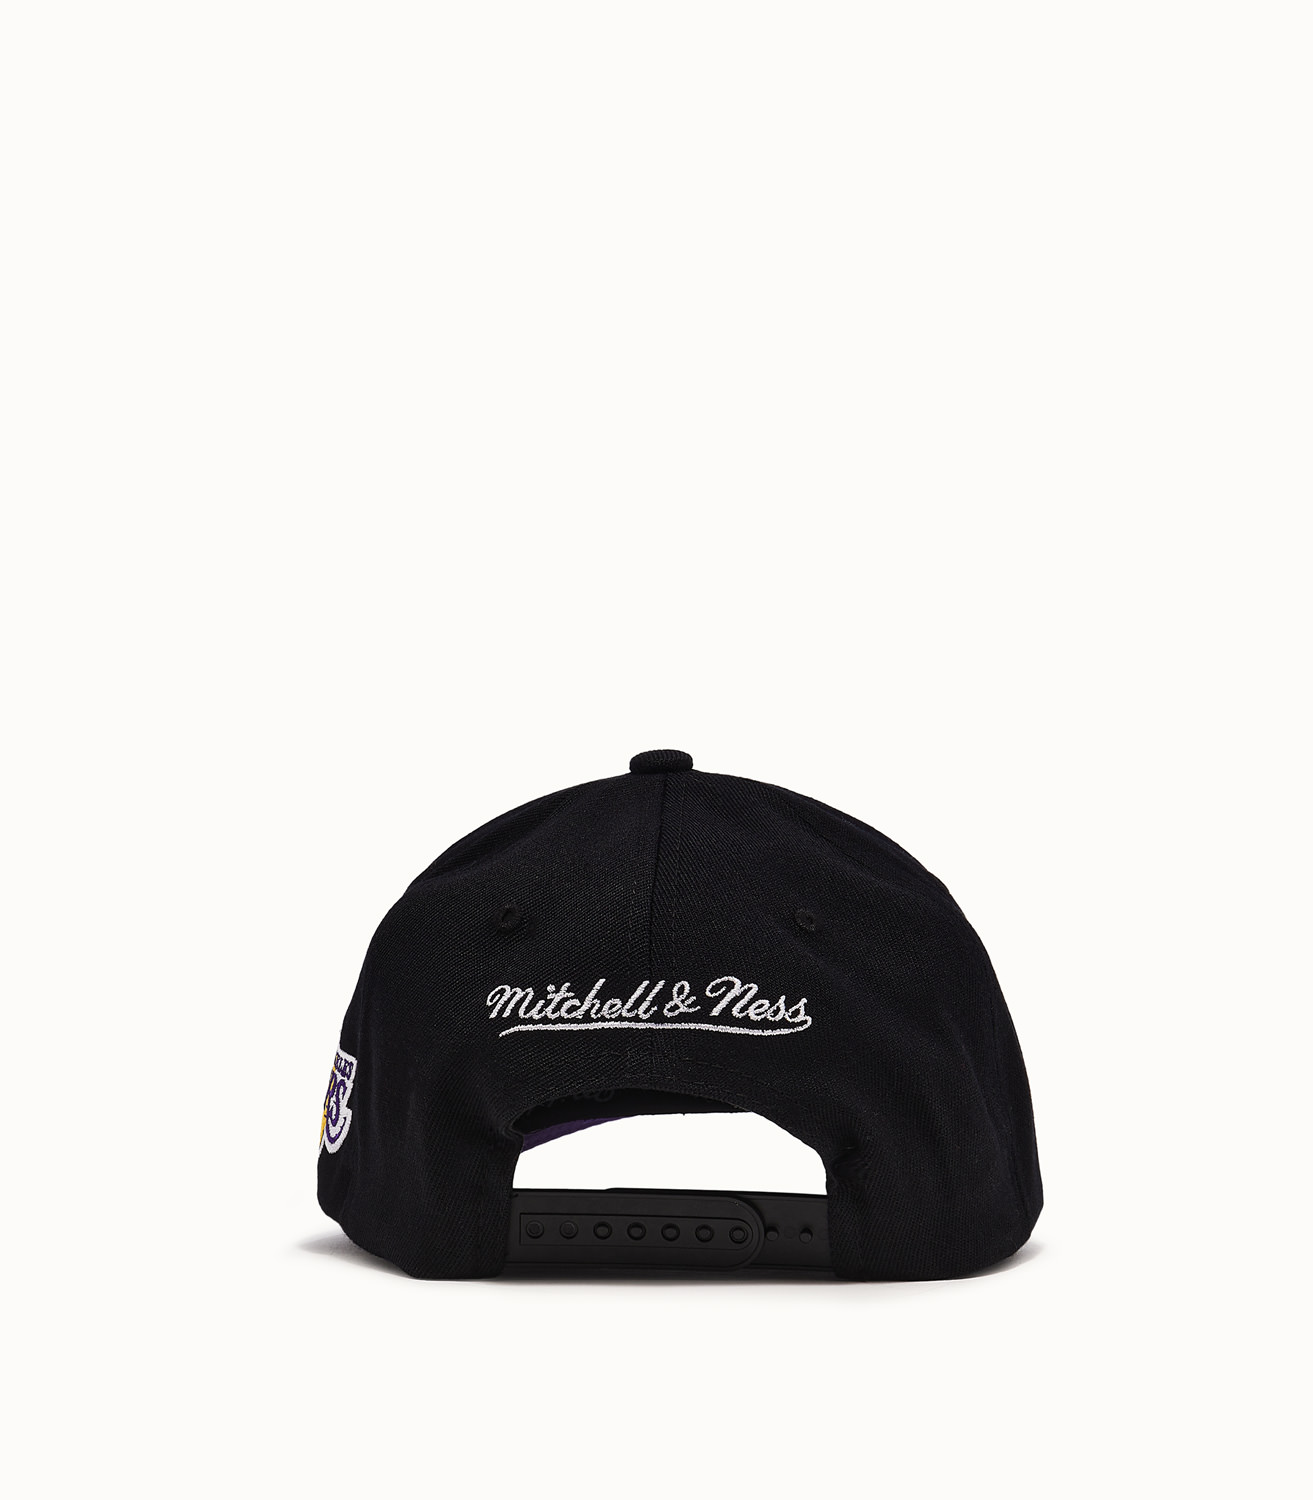 MITCHELL & NESS LOS ANGELES LAKERS BASEBALL CAP COLOR BLACK